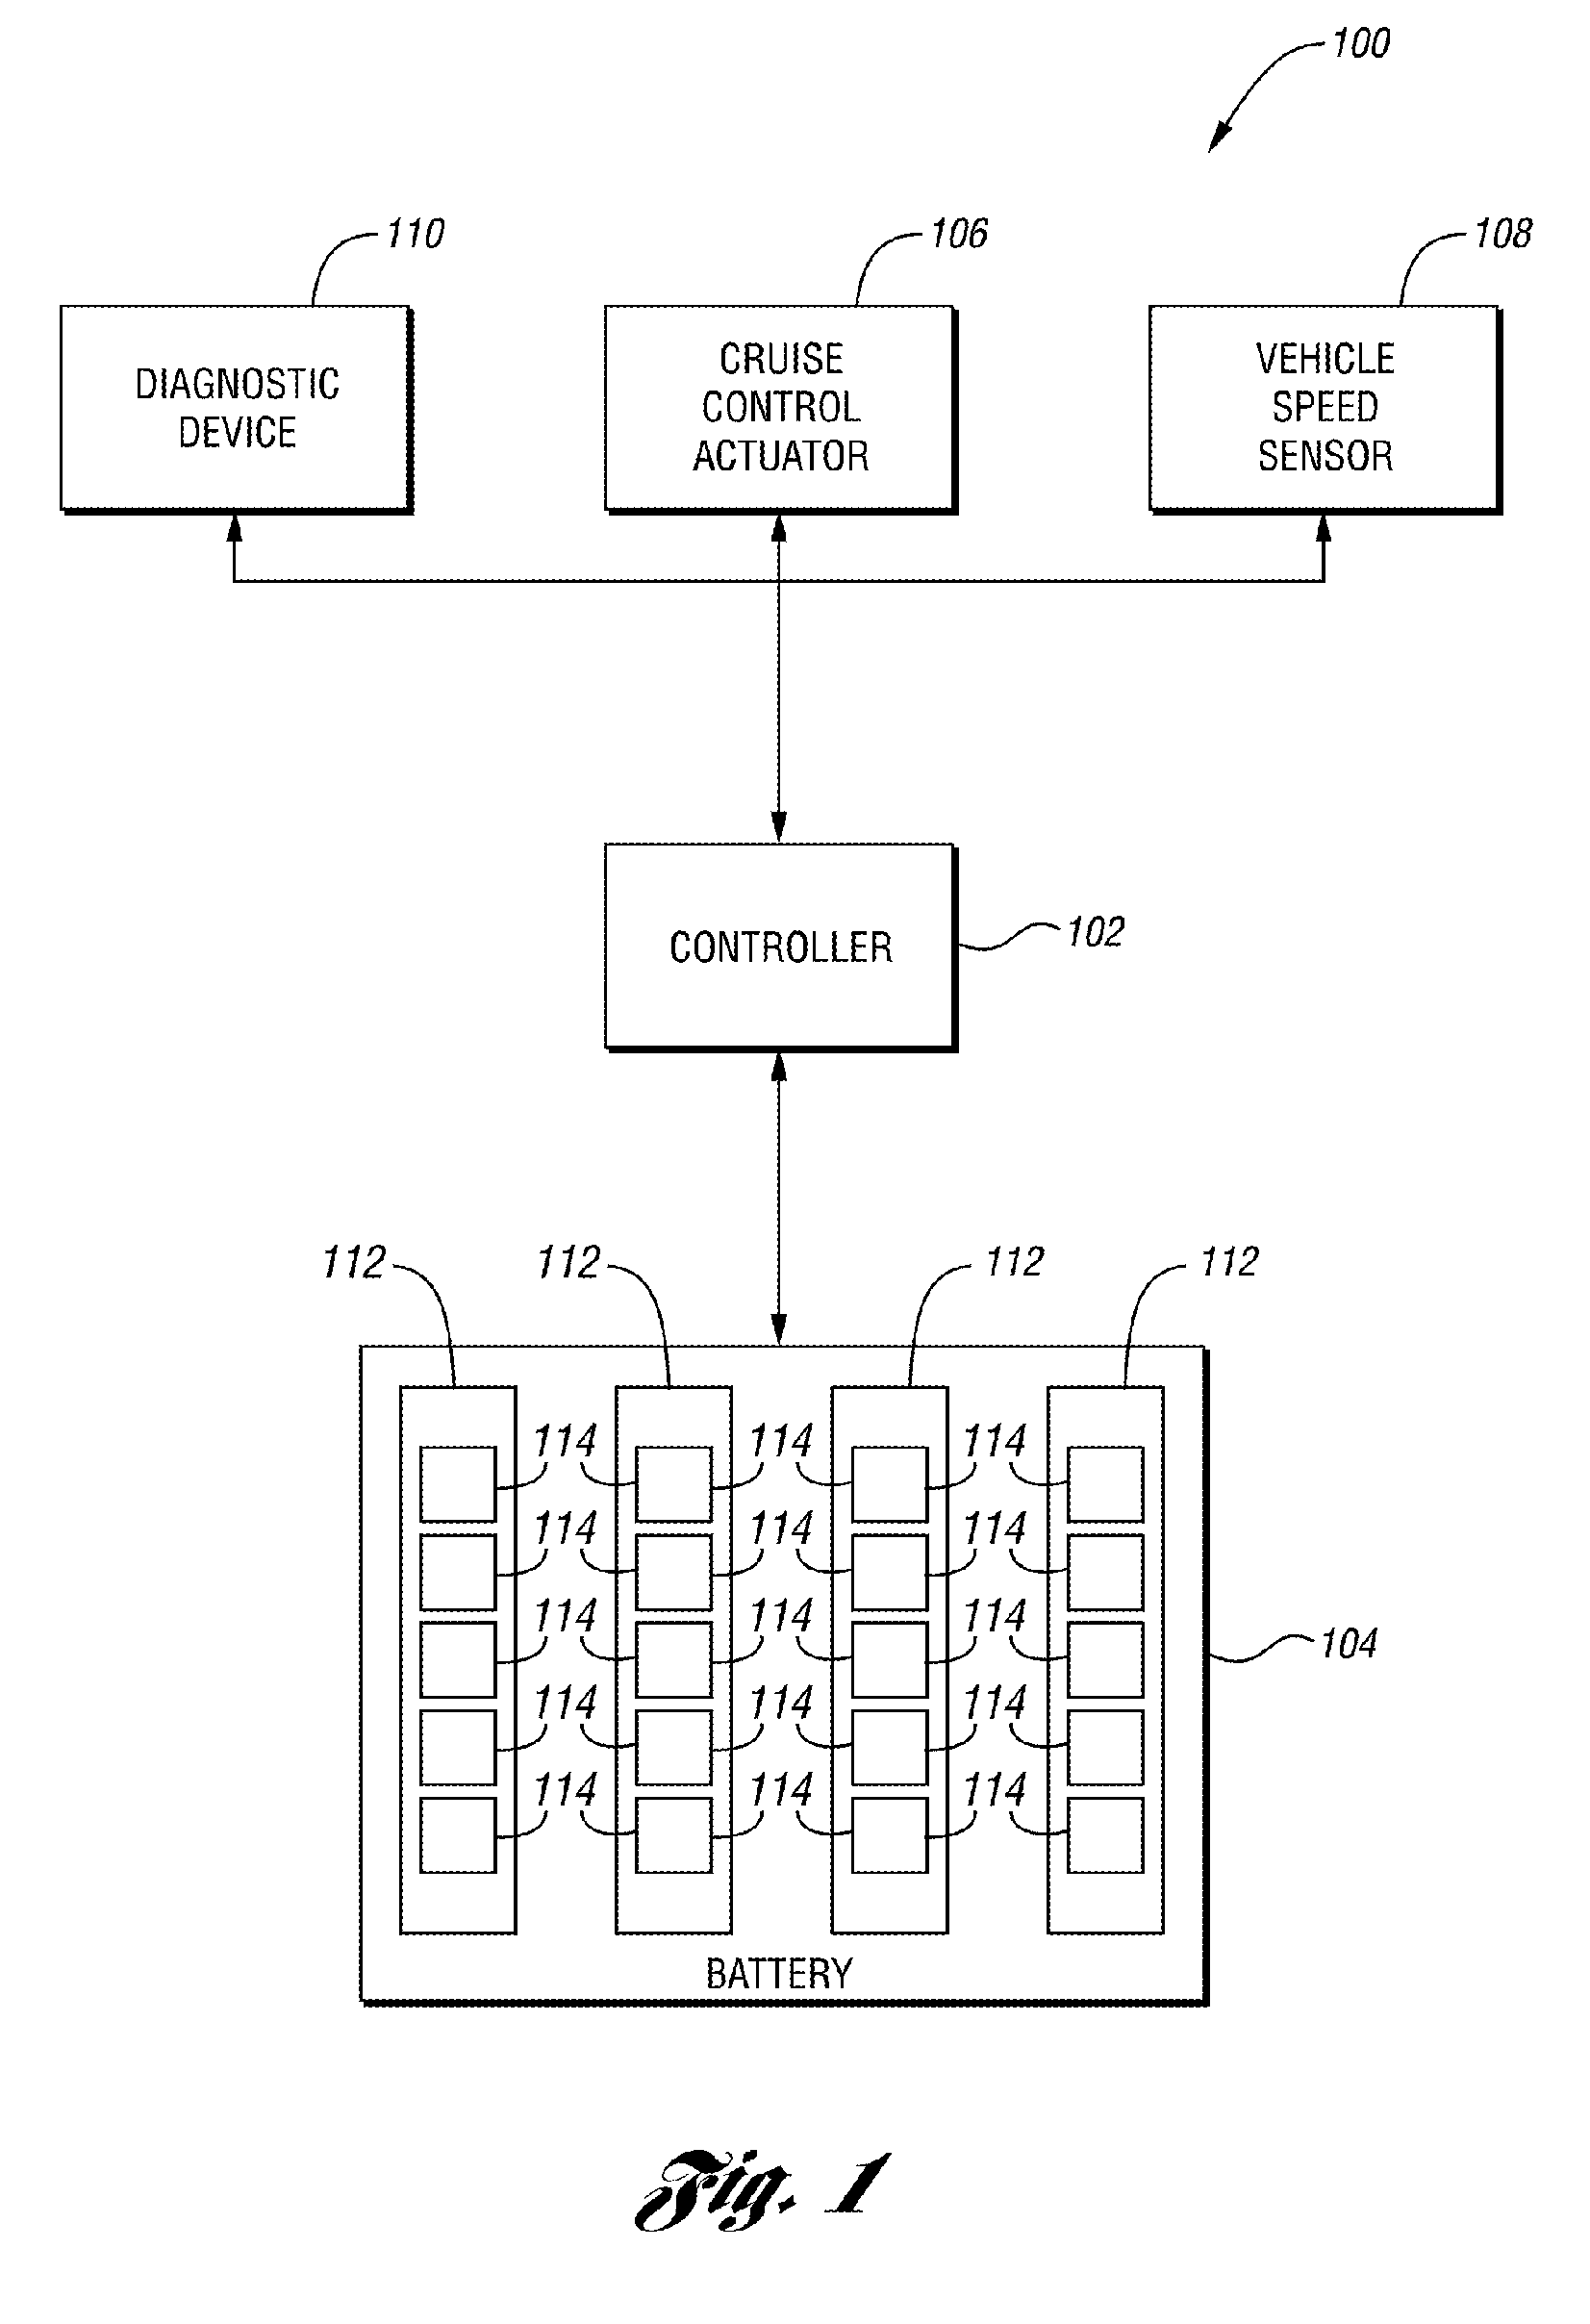 System and method for rebalancing a battery during vehicle operation